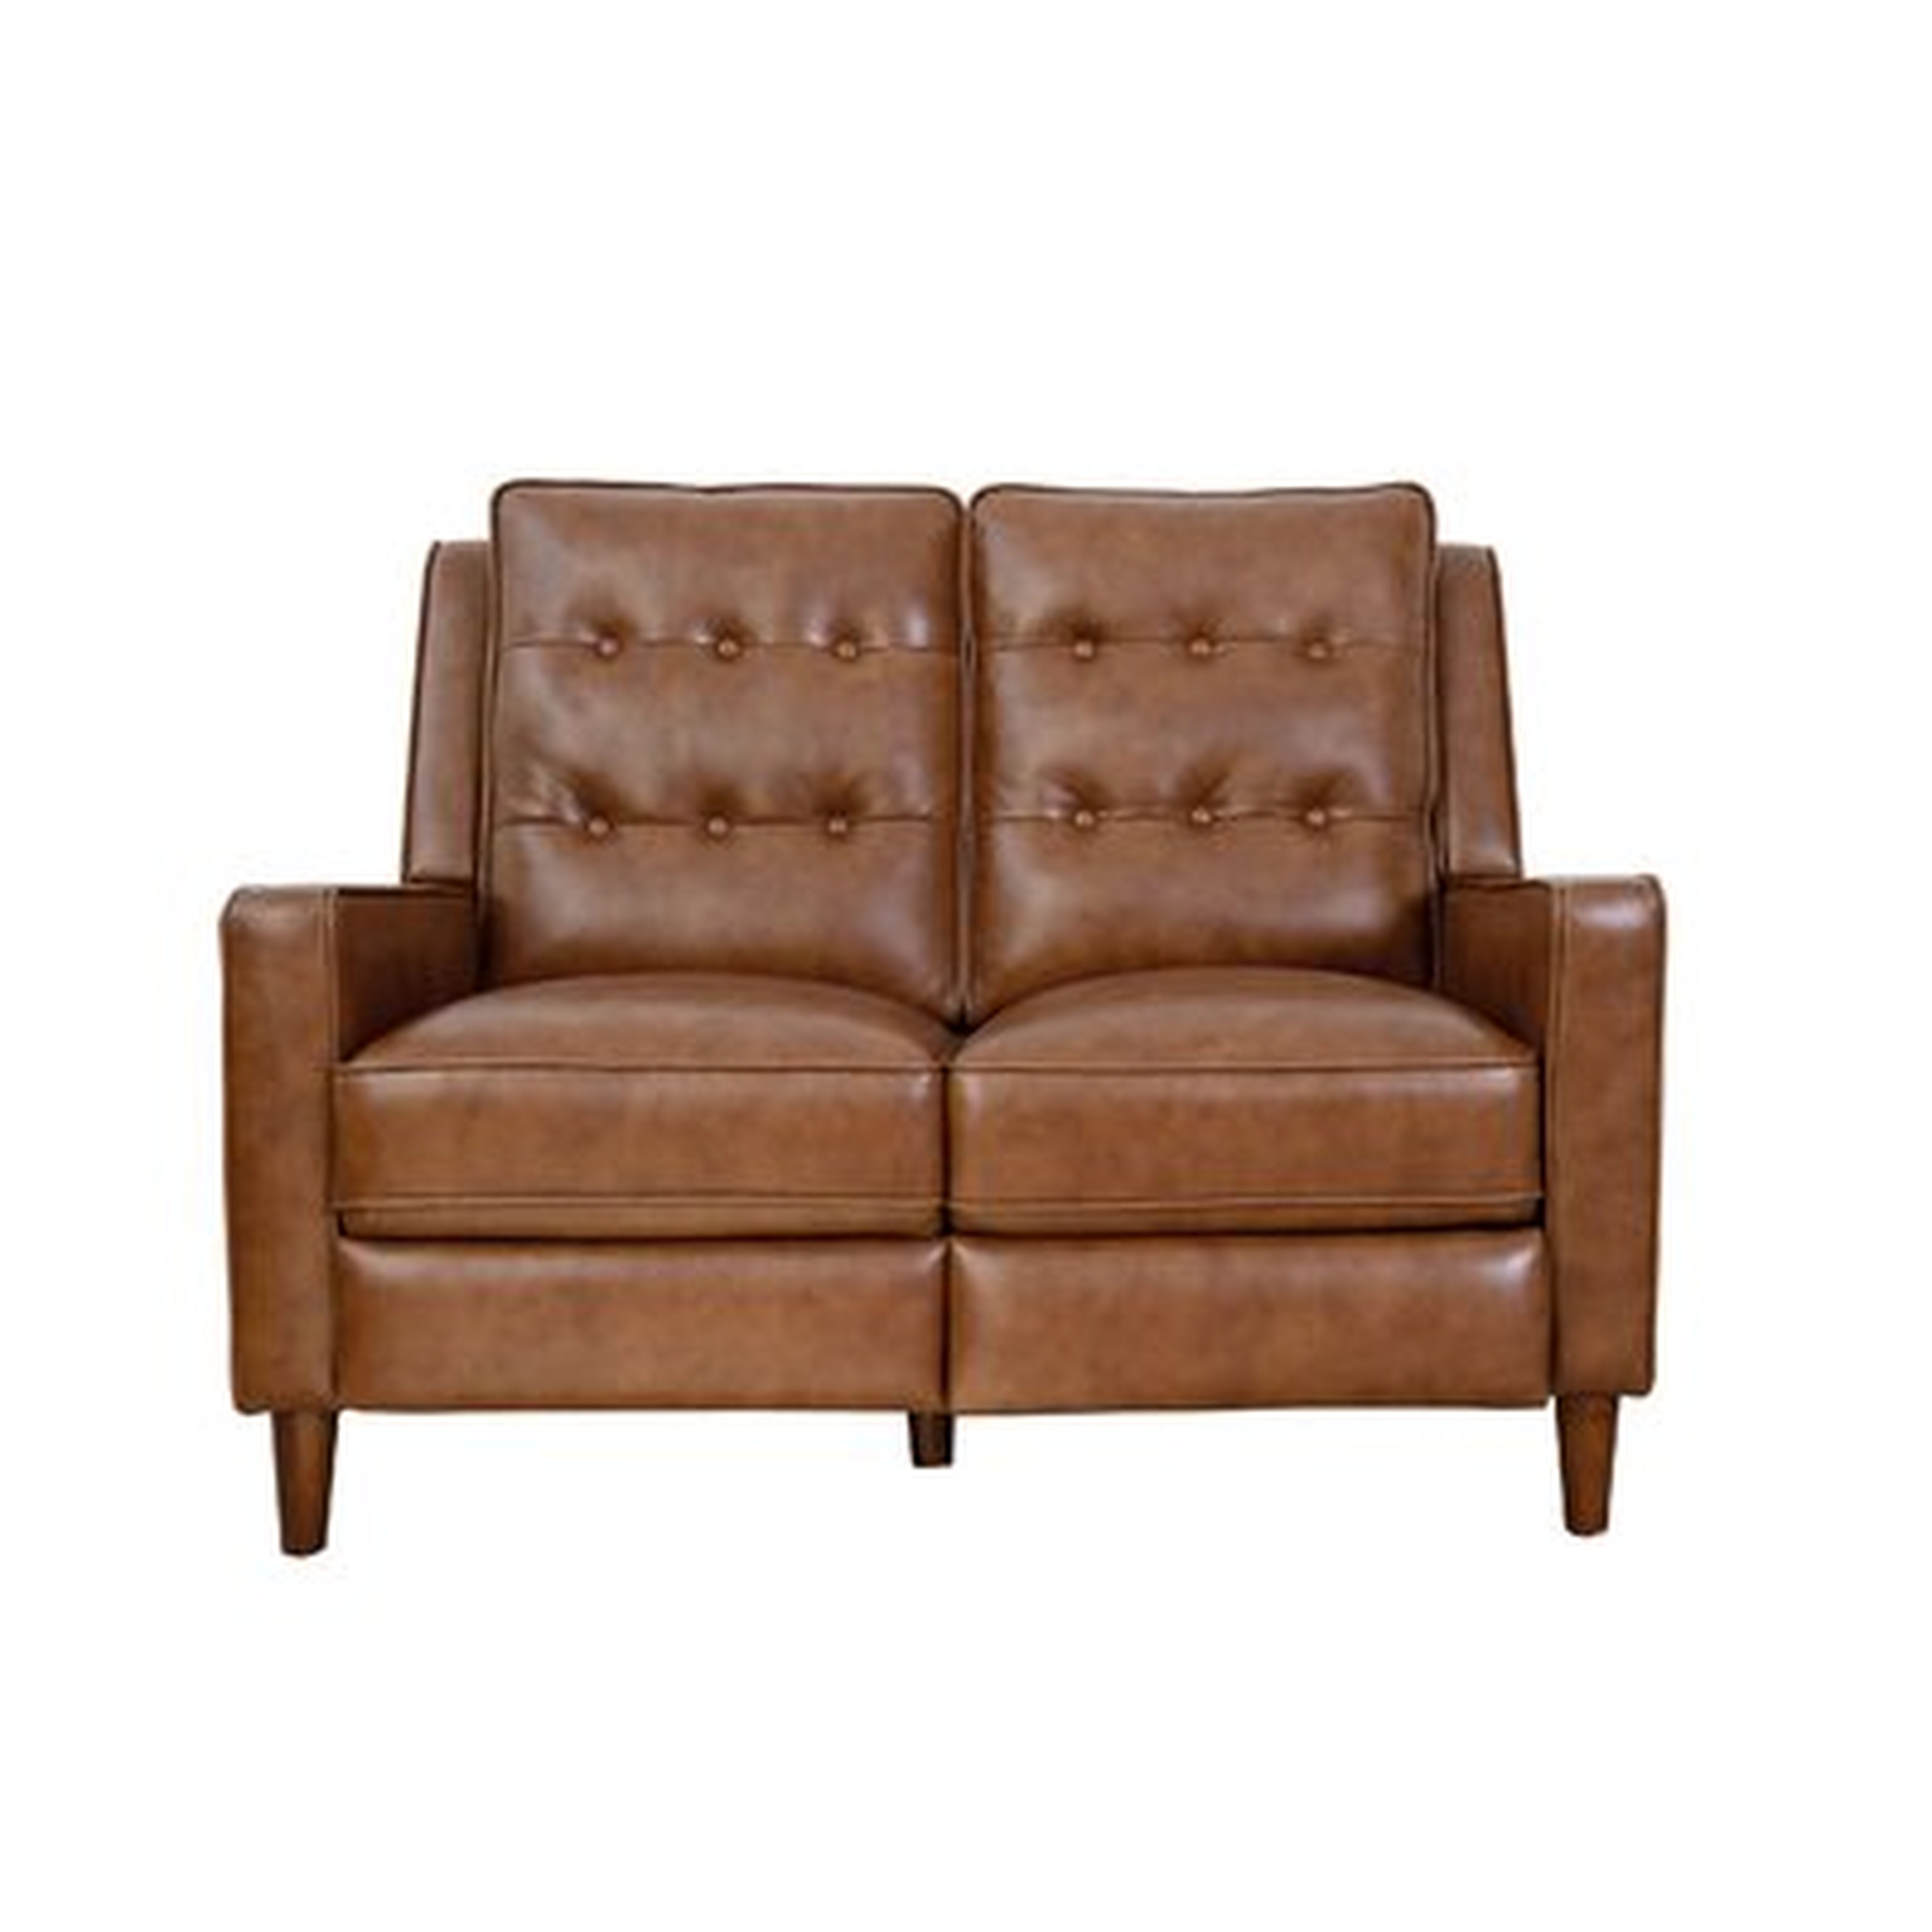 Mary Genuine Leather Reclining 52" Square Arm Loveseat - Wayfair